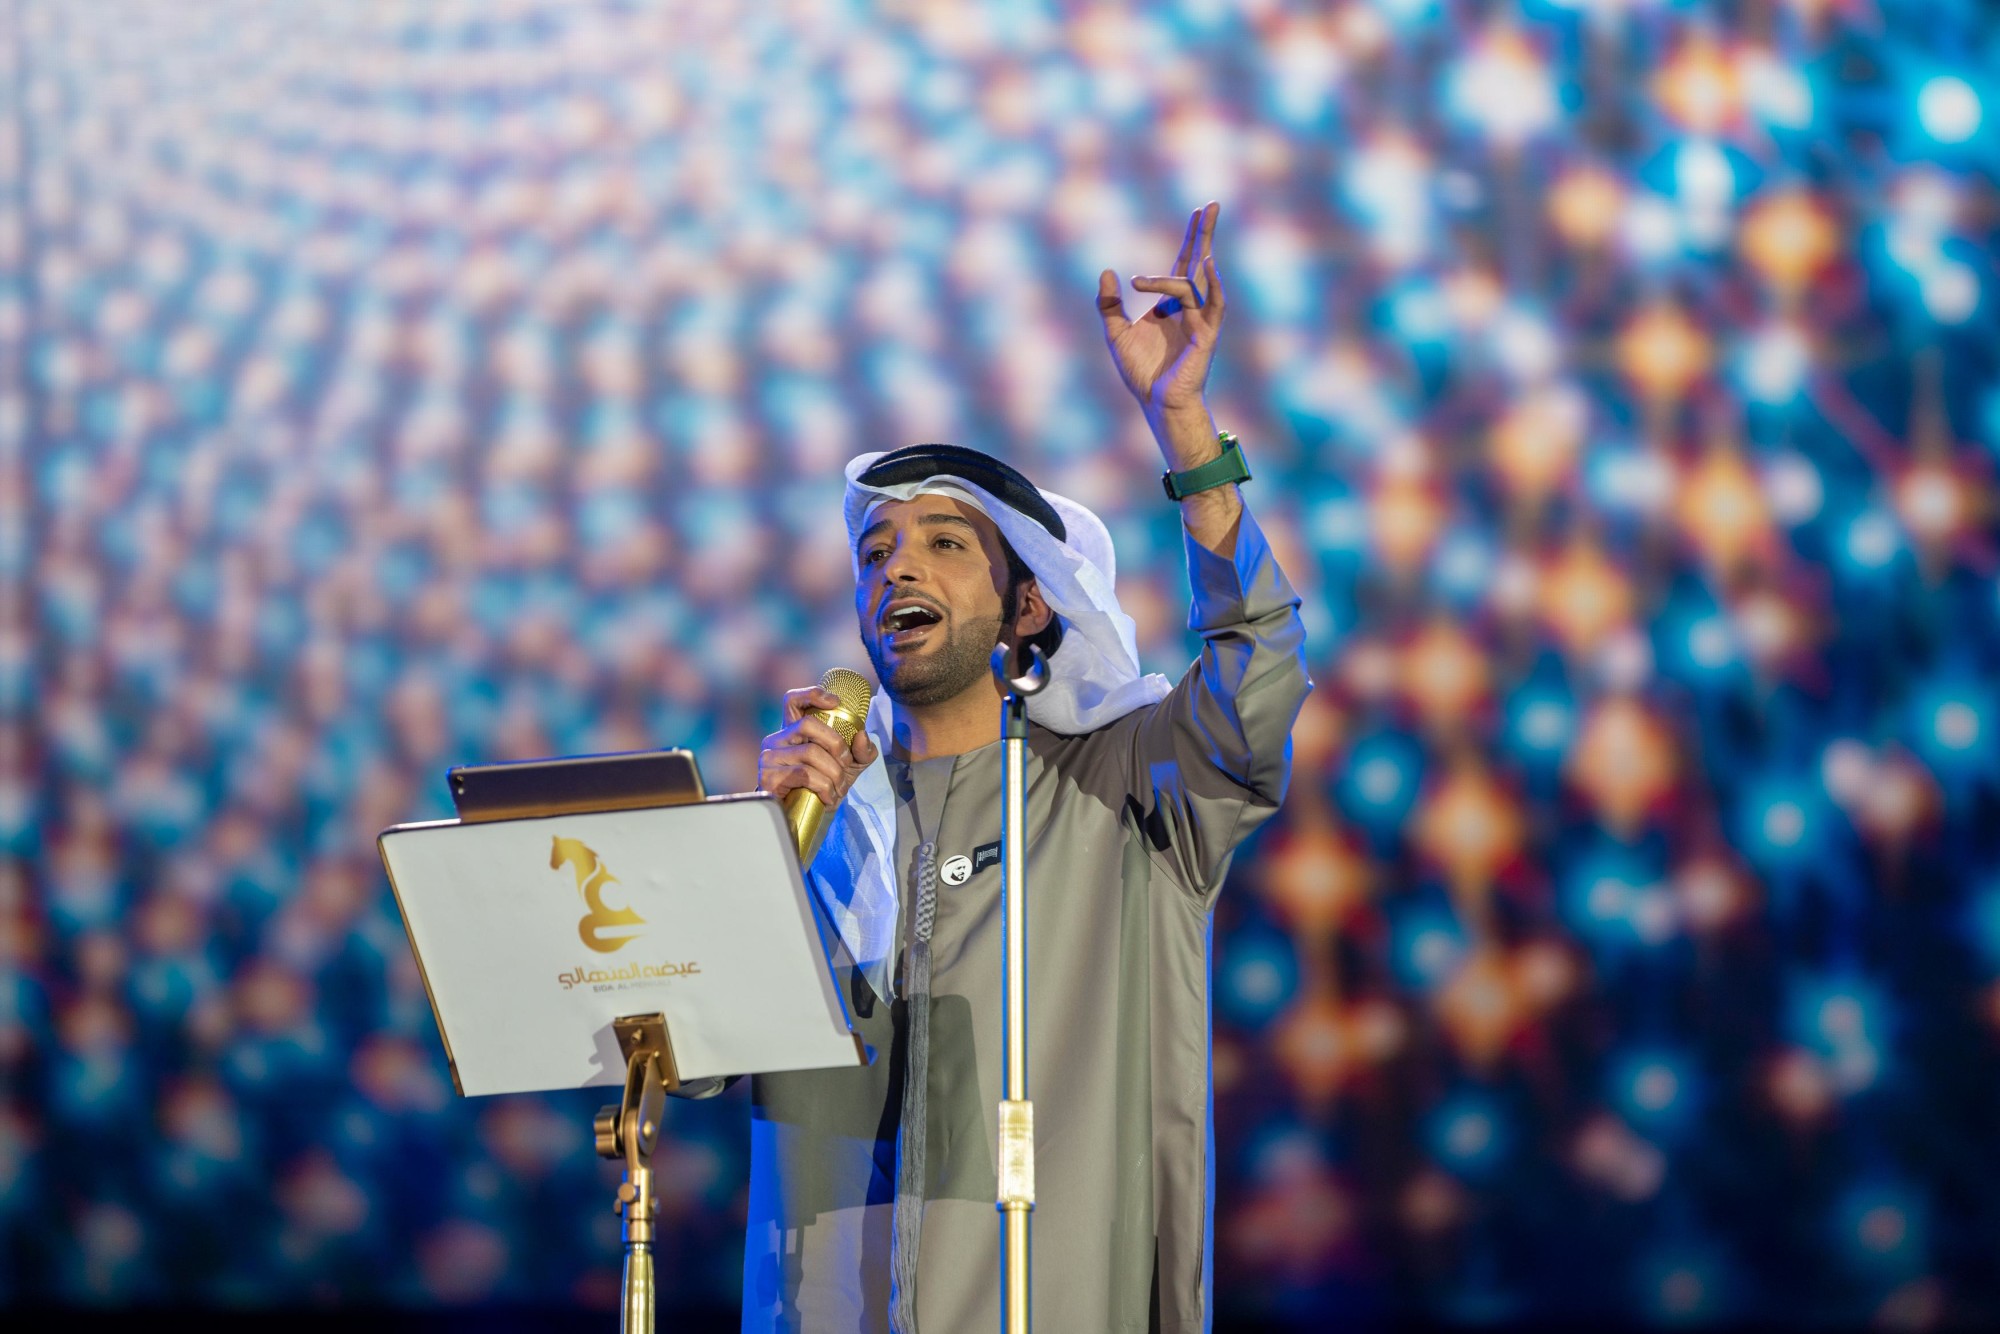 Eidah Al Menhali performs at Jubilee Stage during UAE National Day and the Golden Jubilee Celebrations m16110